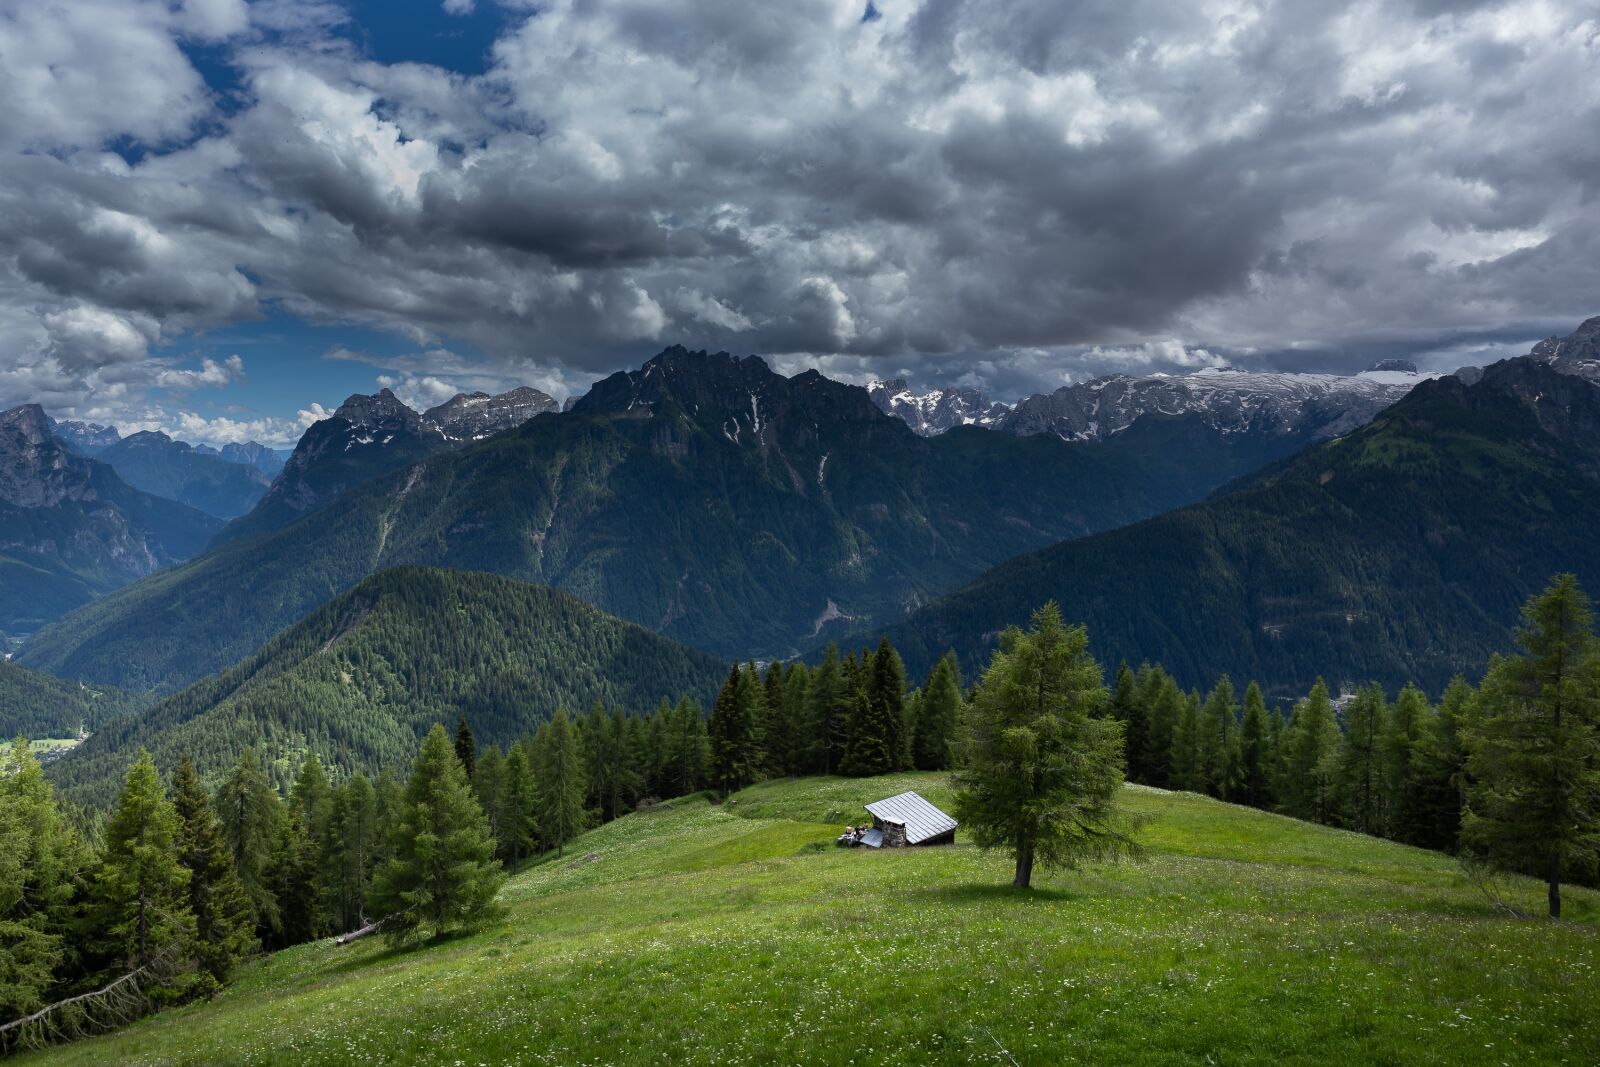 ZEISS Loxia 21mm F2.8 sample photo. Dolomites, italy, nature photography